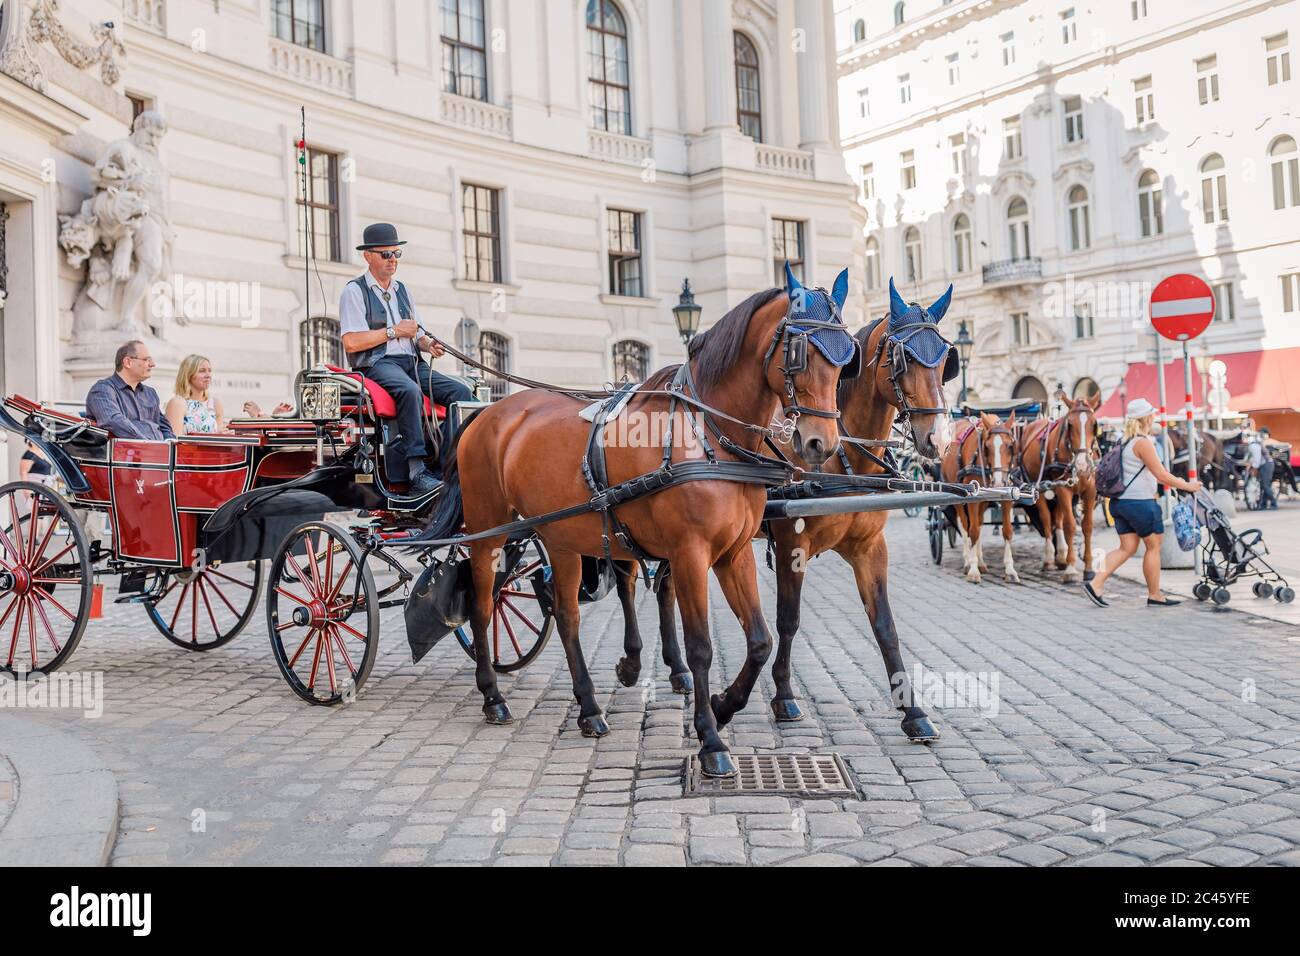 Fiaker - hackney coach, carriage drawn by two horses in Vienna Stock Photo